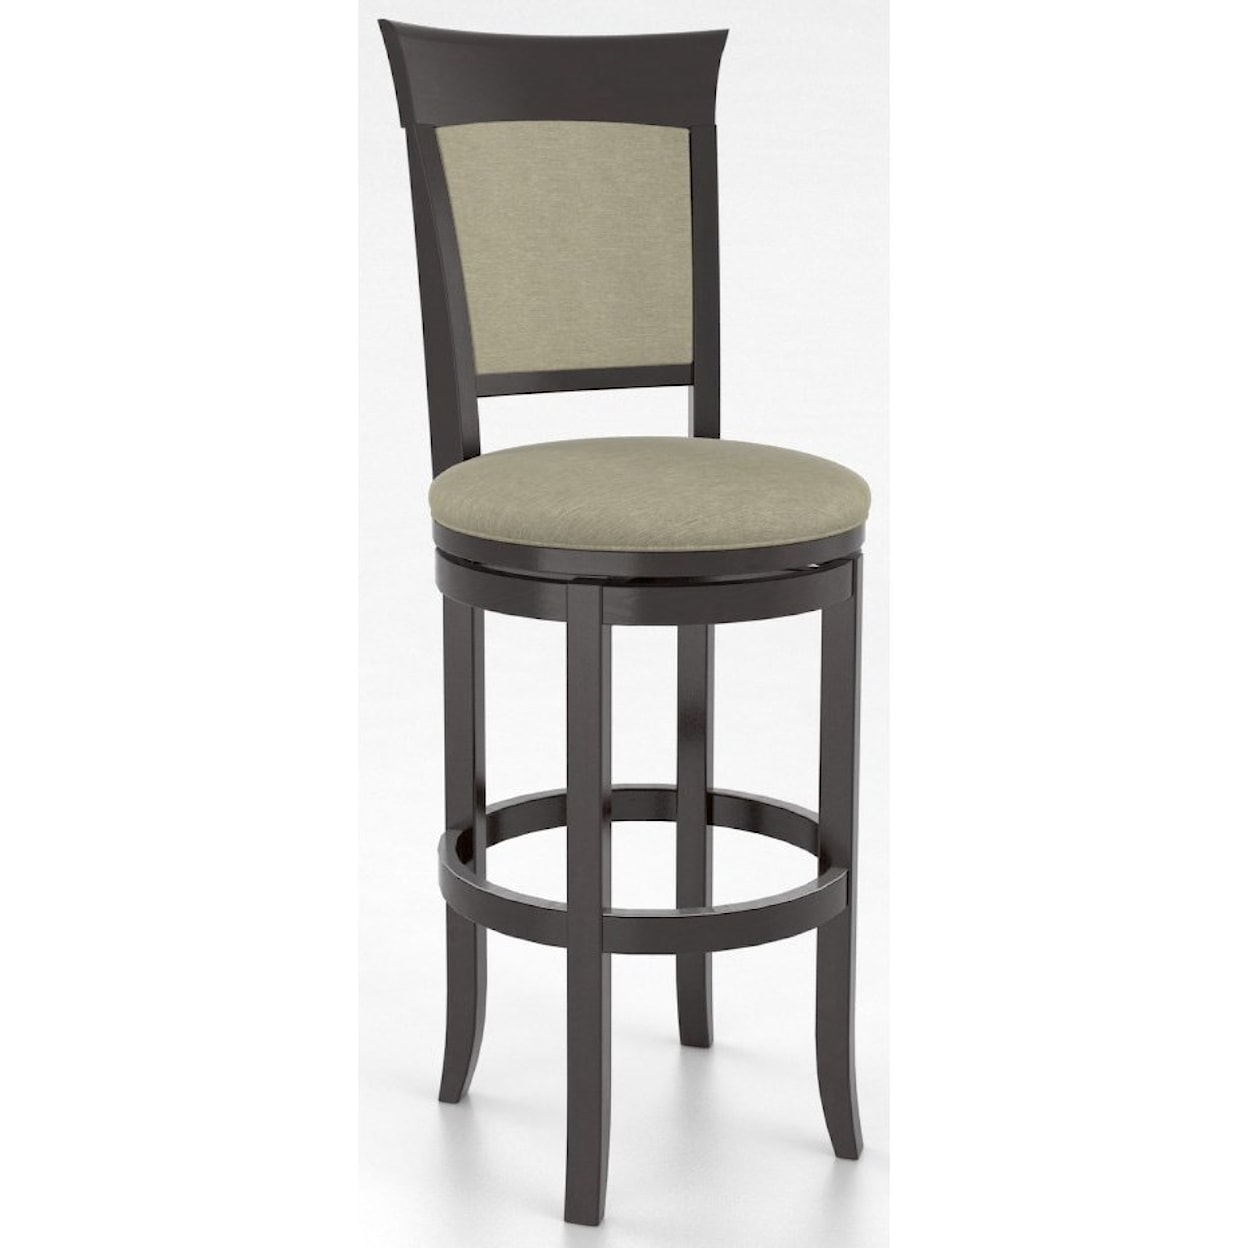 Canadel Canadel Customizable 32" Upholstered Swivel Stool